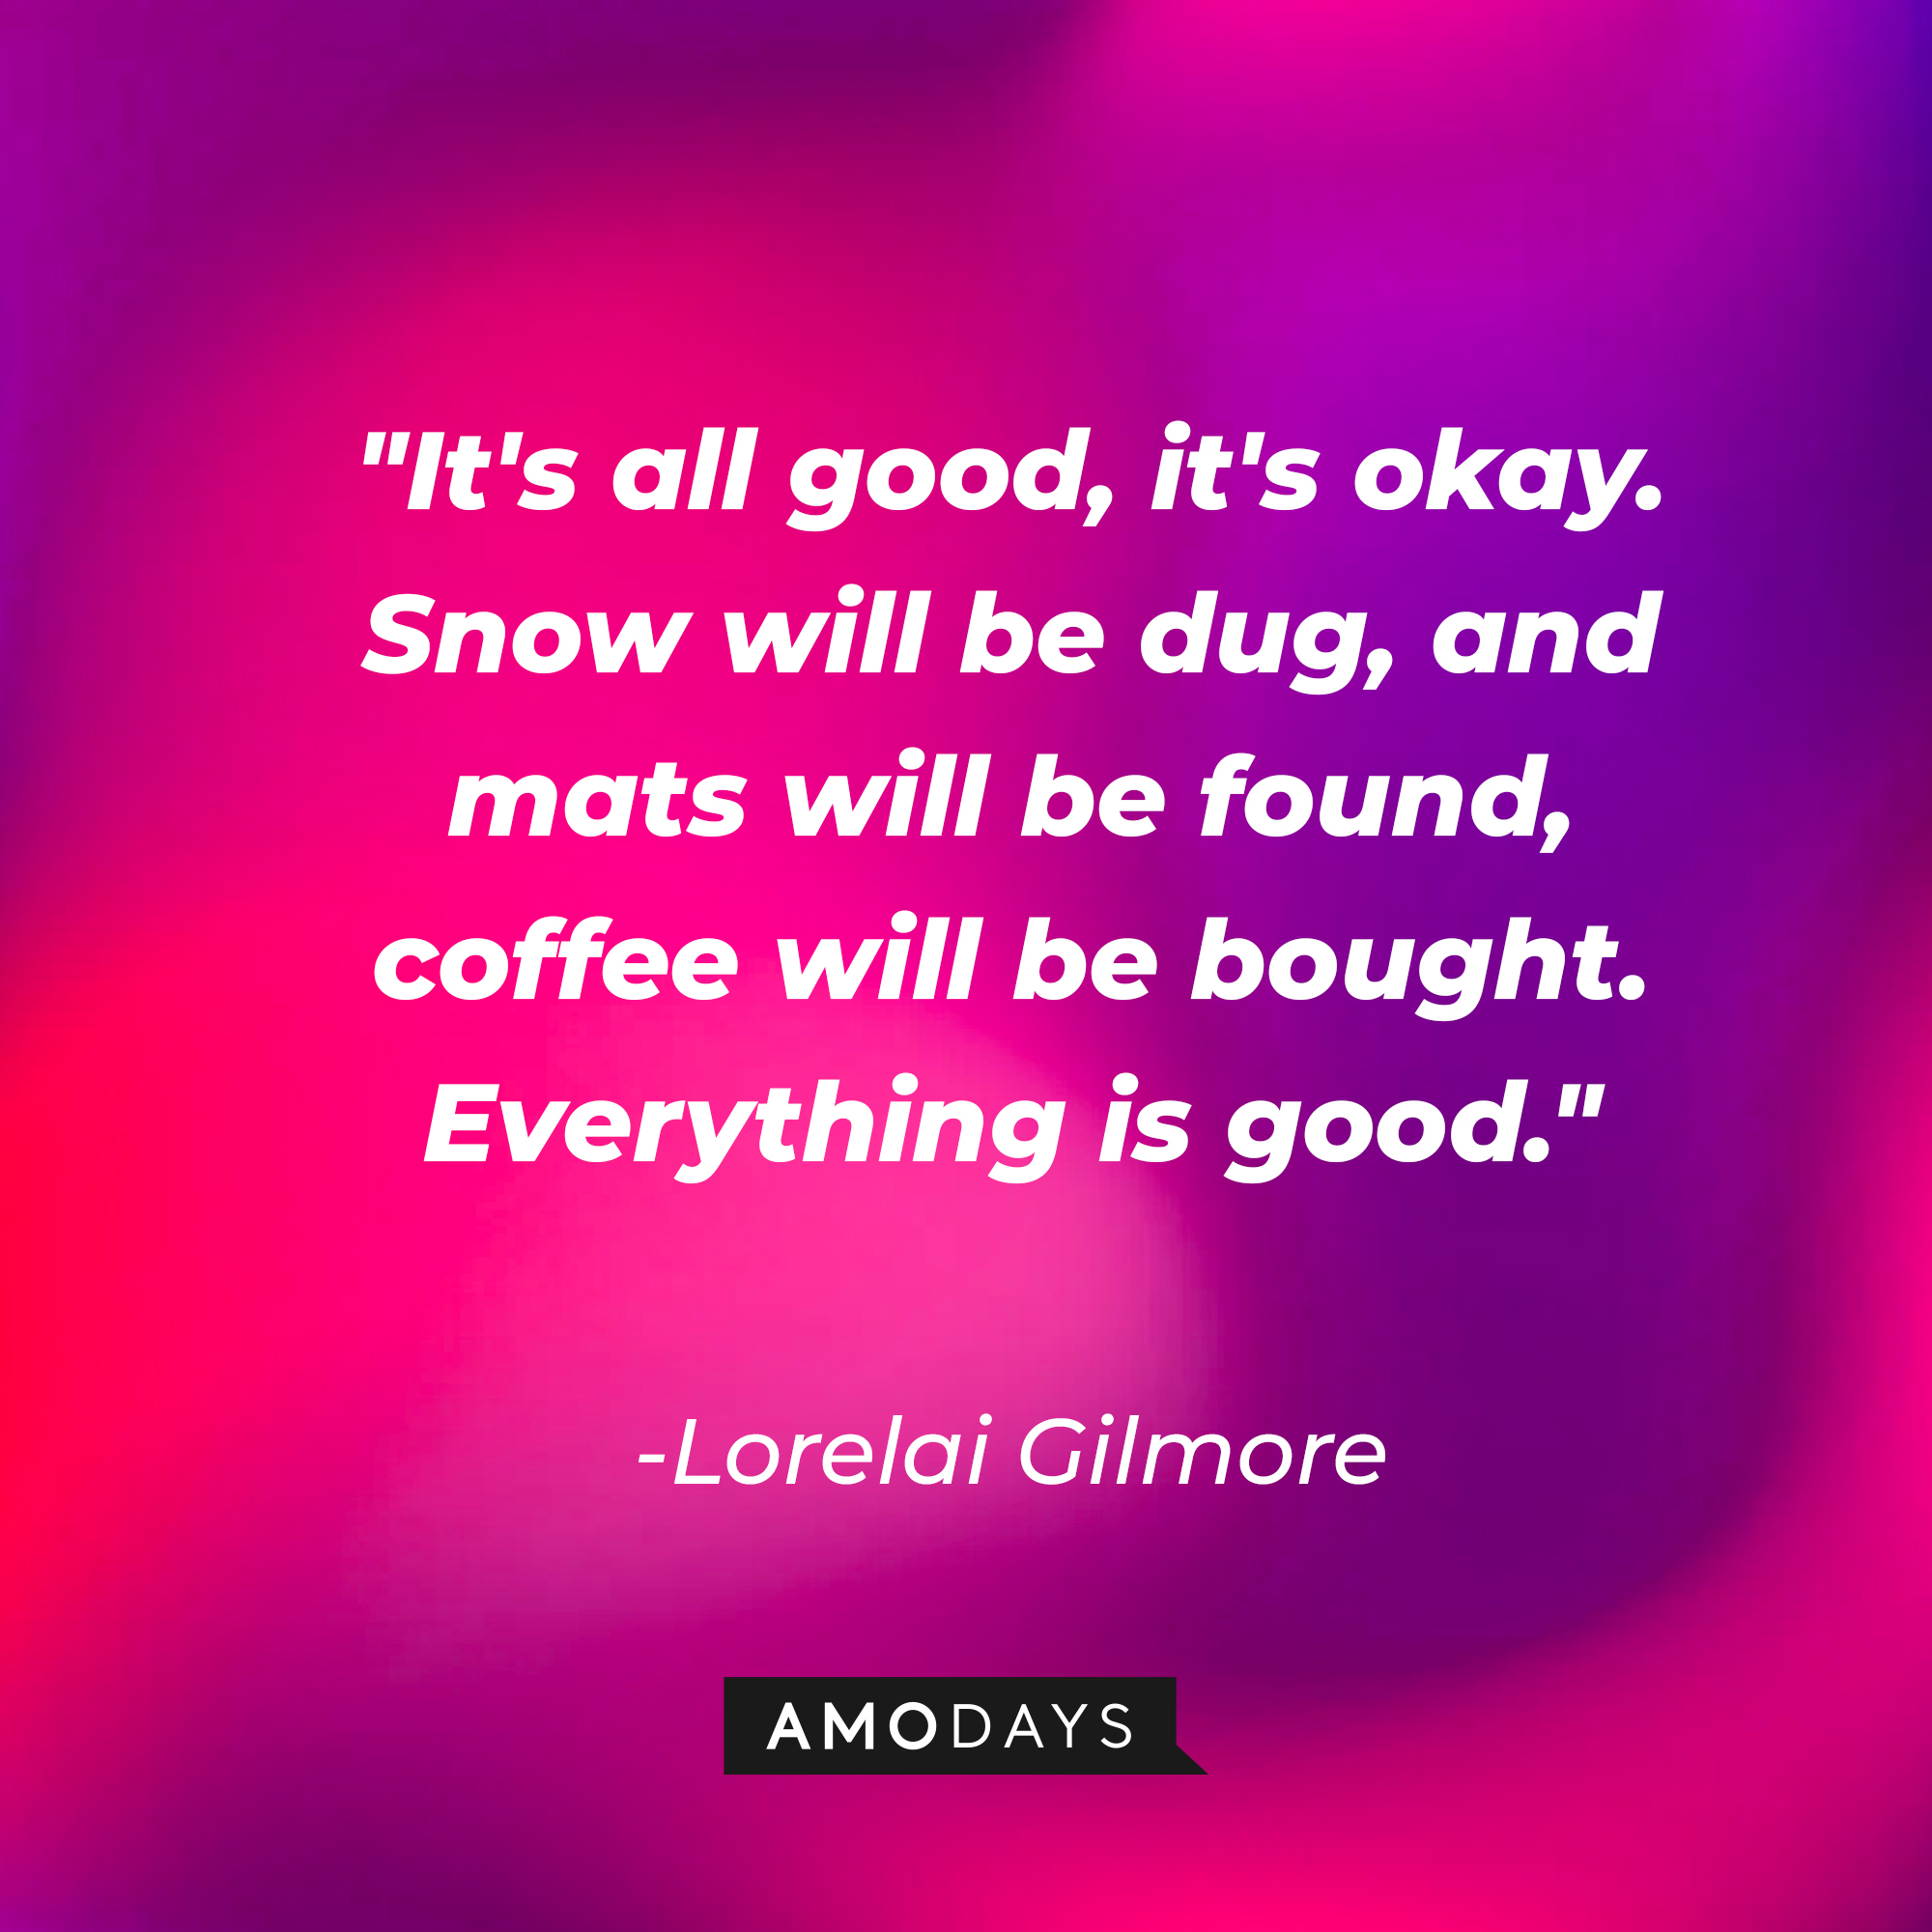 Lorelai Gilmore's quote: "It's all good, it's okay. Snow will be dug, and mats will be found, coffee will be bought. Everything is good." | Source: AmoDays